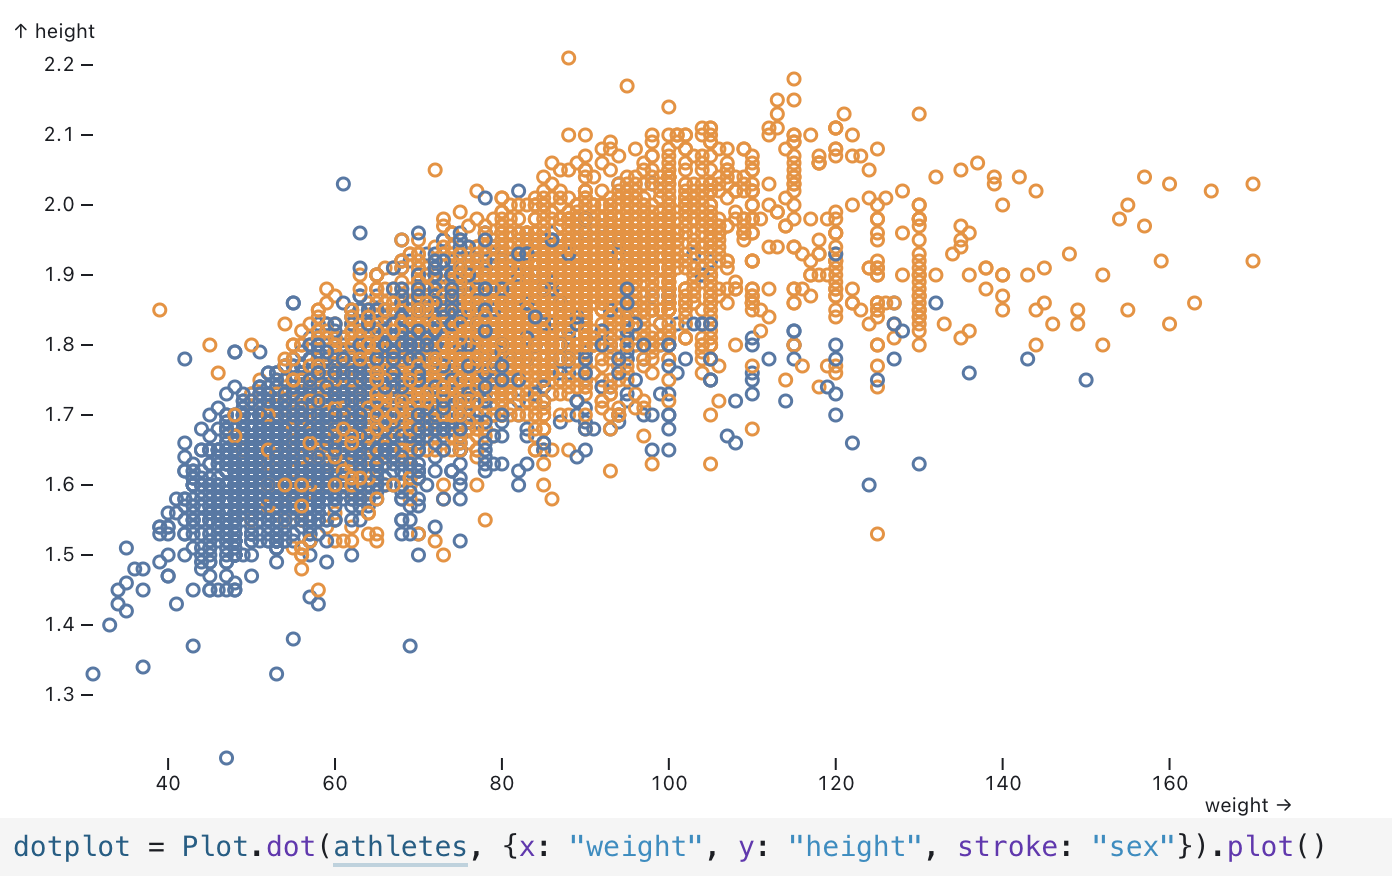 A scatter plot of athletes' weigth (x axis) and height (y axis), made with Observable Plot